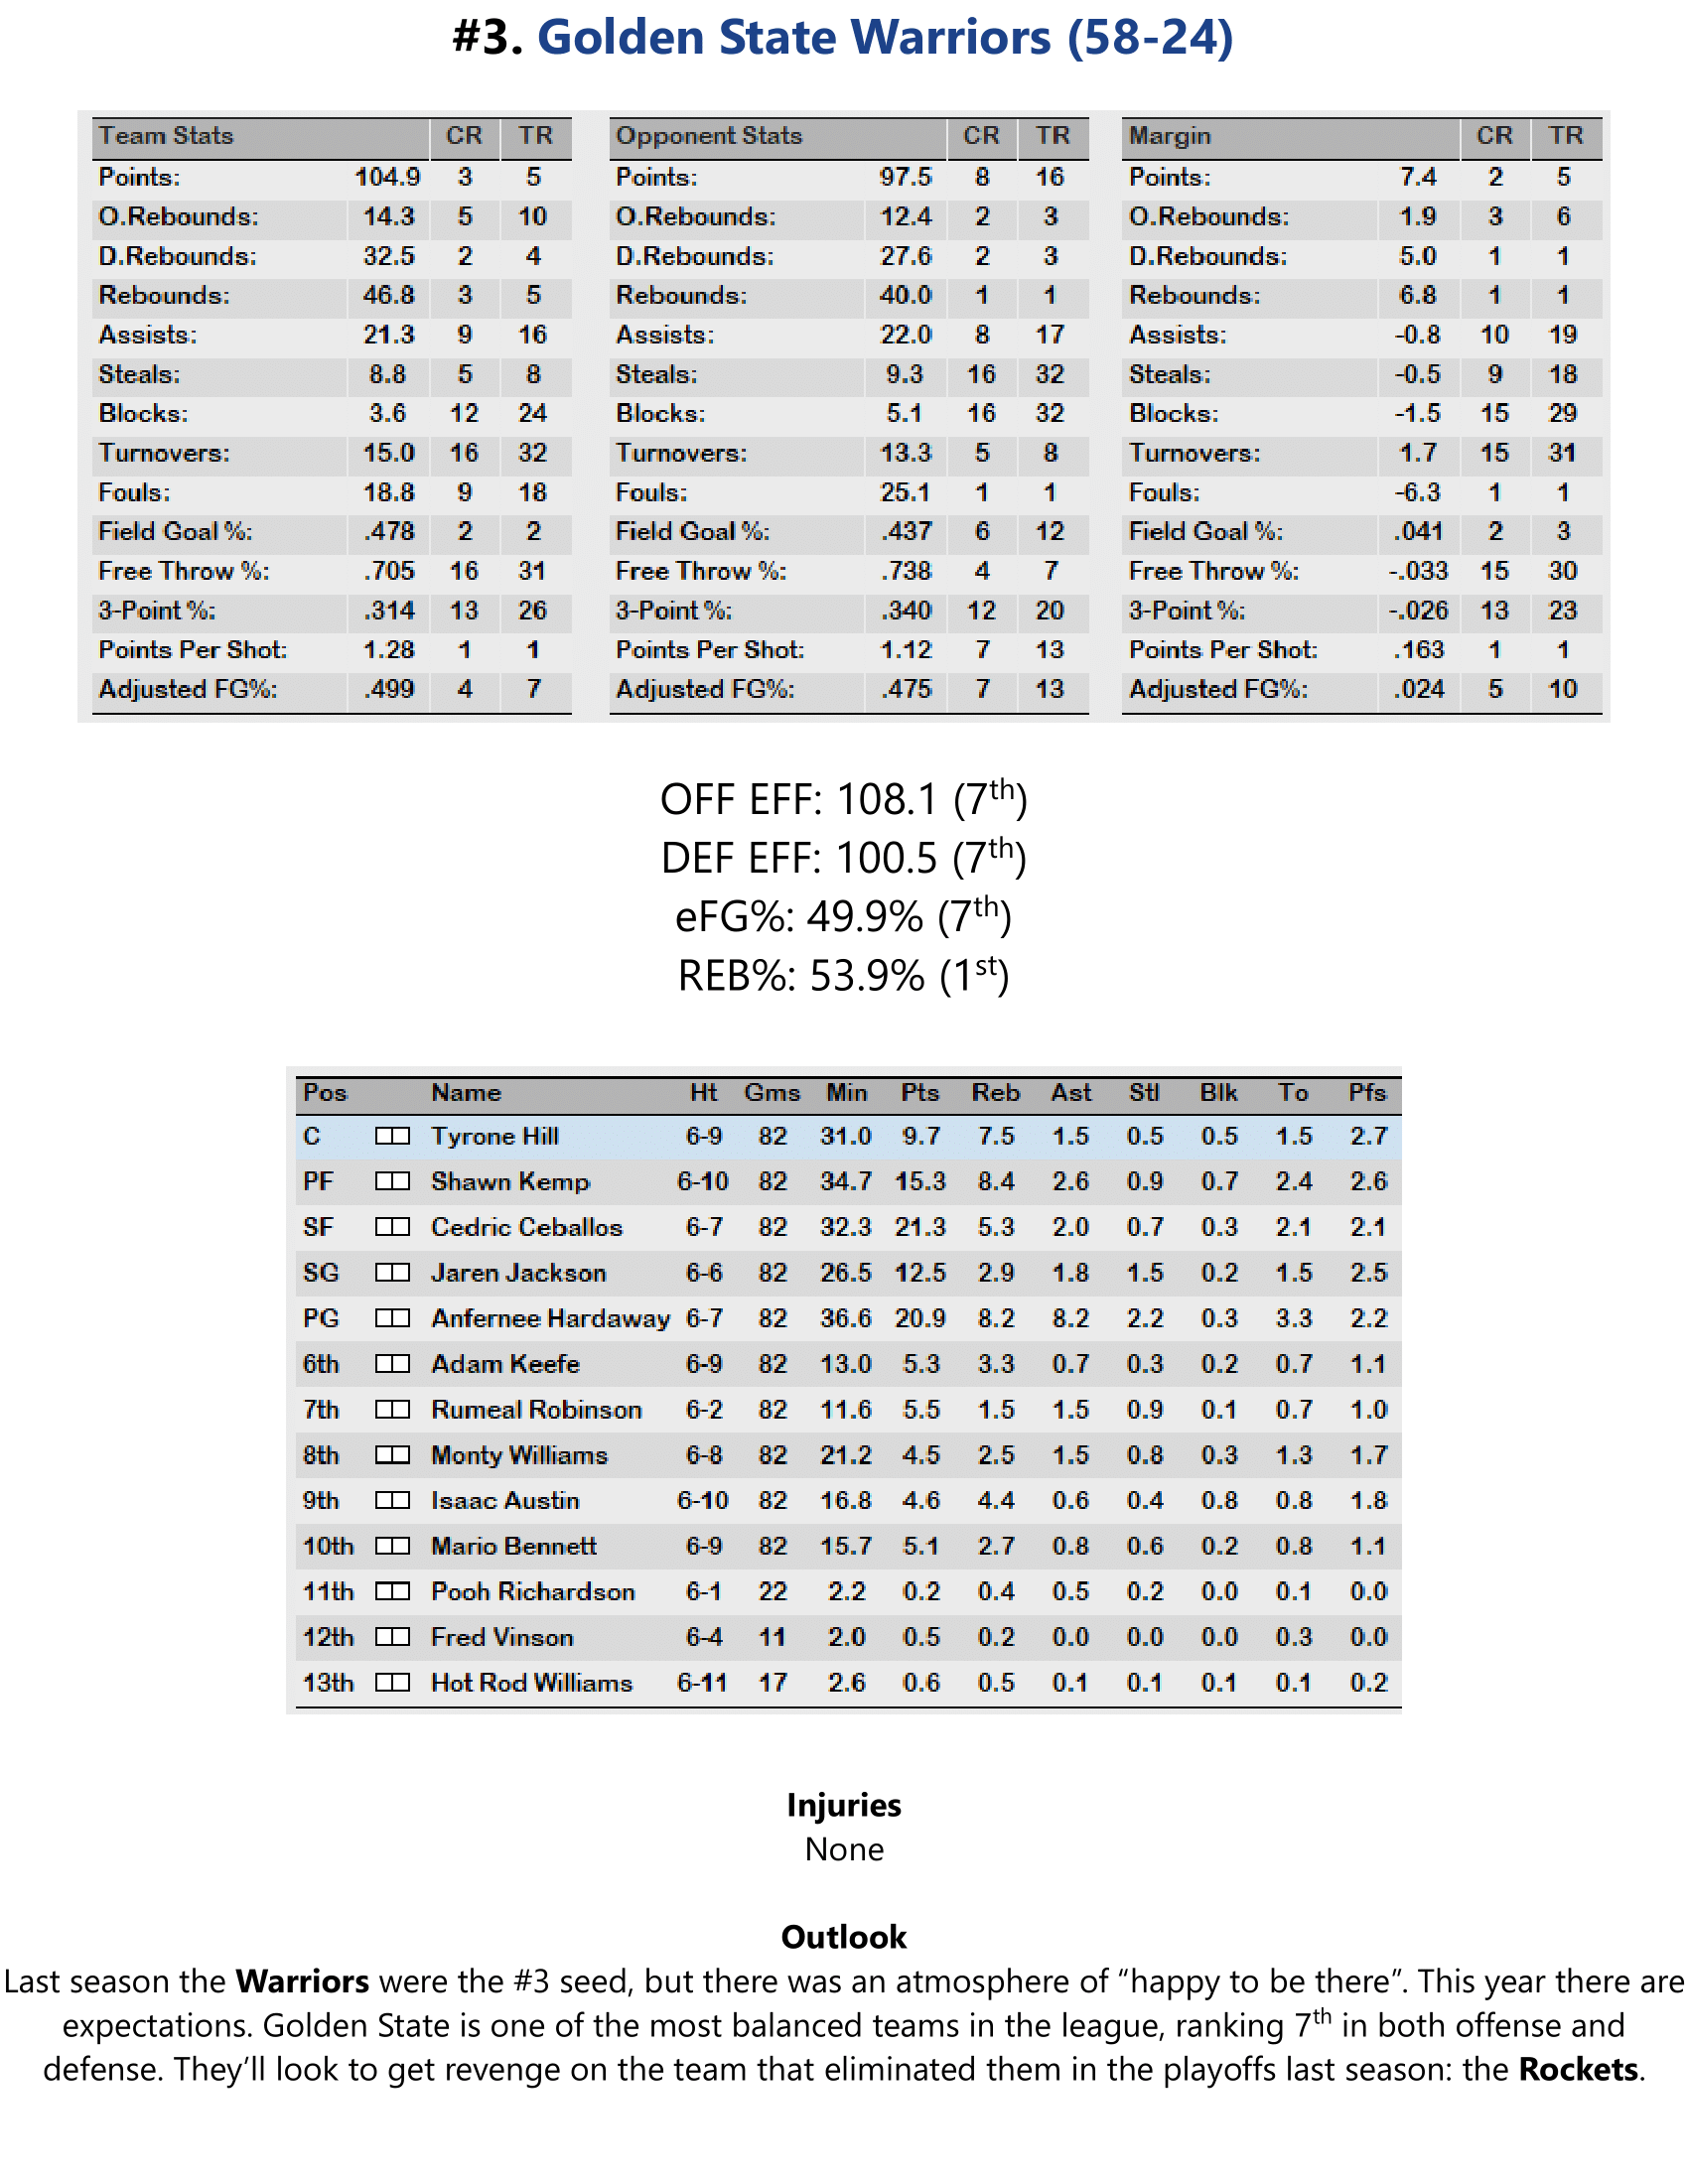 95-96-Part-3-Playoff-Preview-04.png